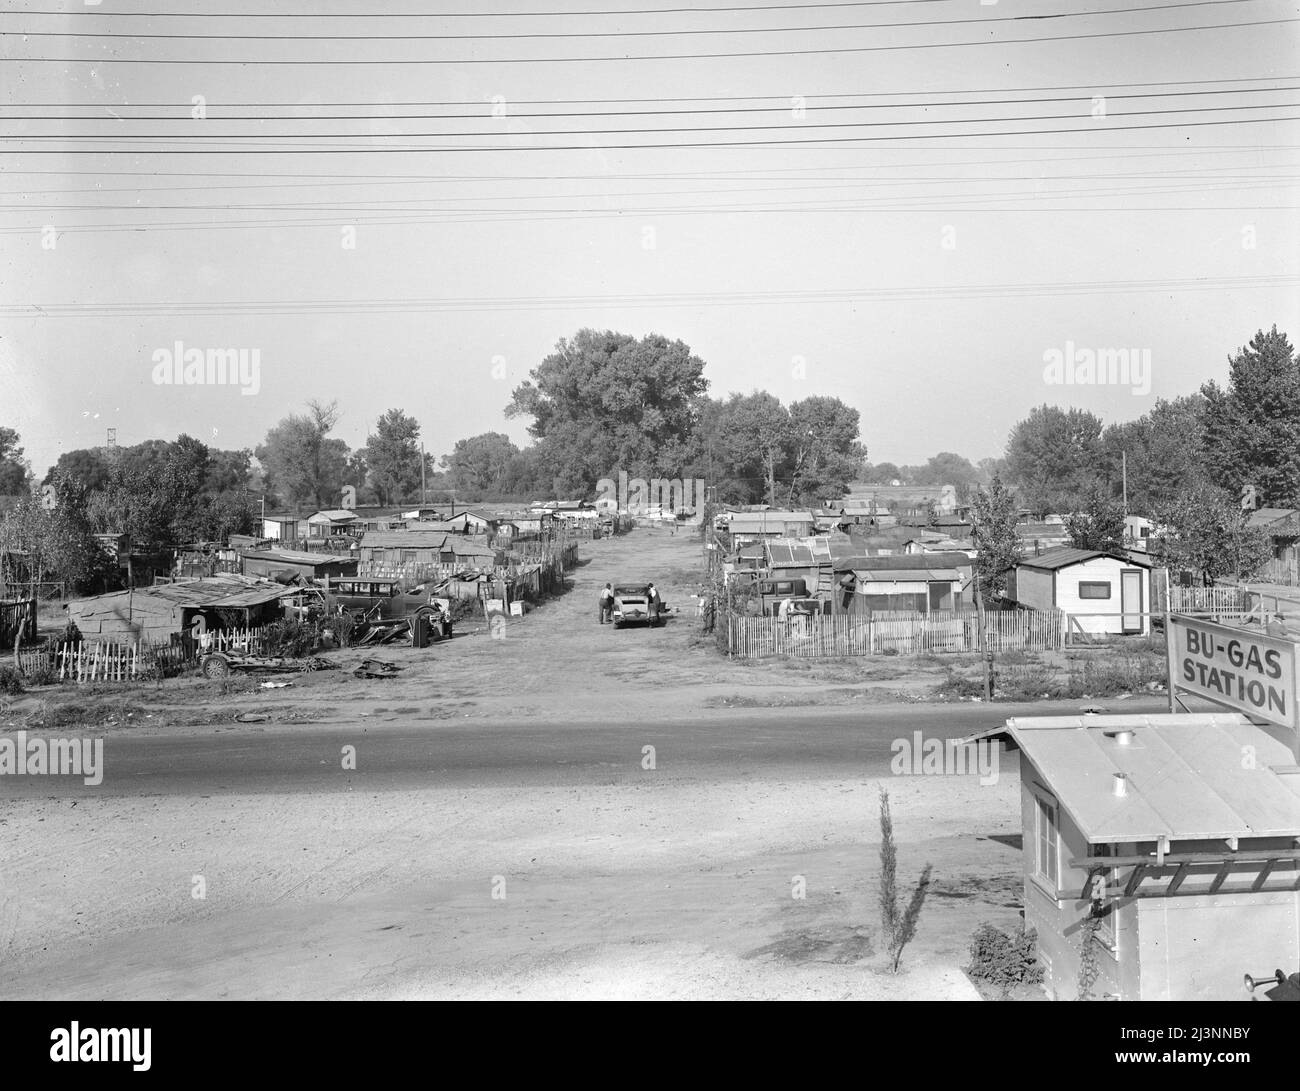 Migrant winter camp on outskirts of Sacramento, California. Eighty families, build their own shacks, pay one dollar and twenty-five cents a month ground rent which includes water. One half-mile from American River camp. Stock Photo